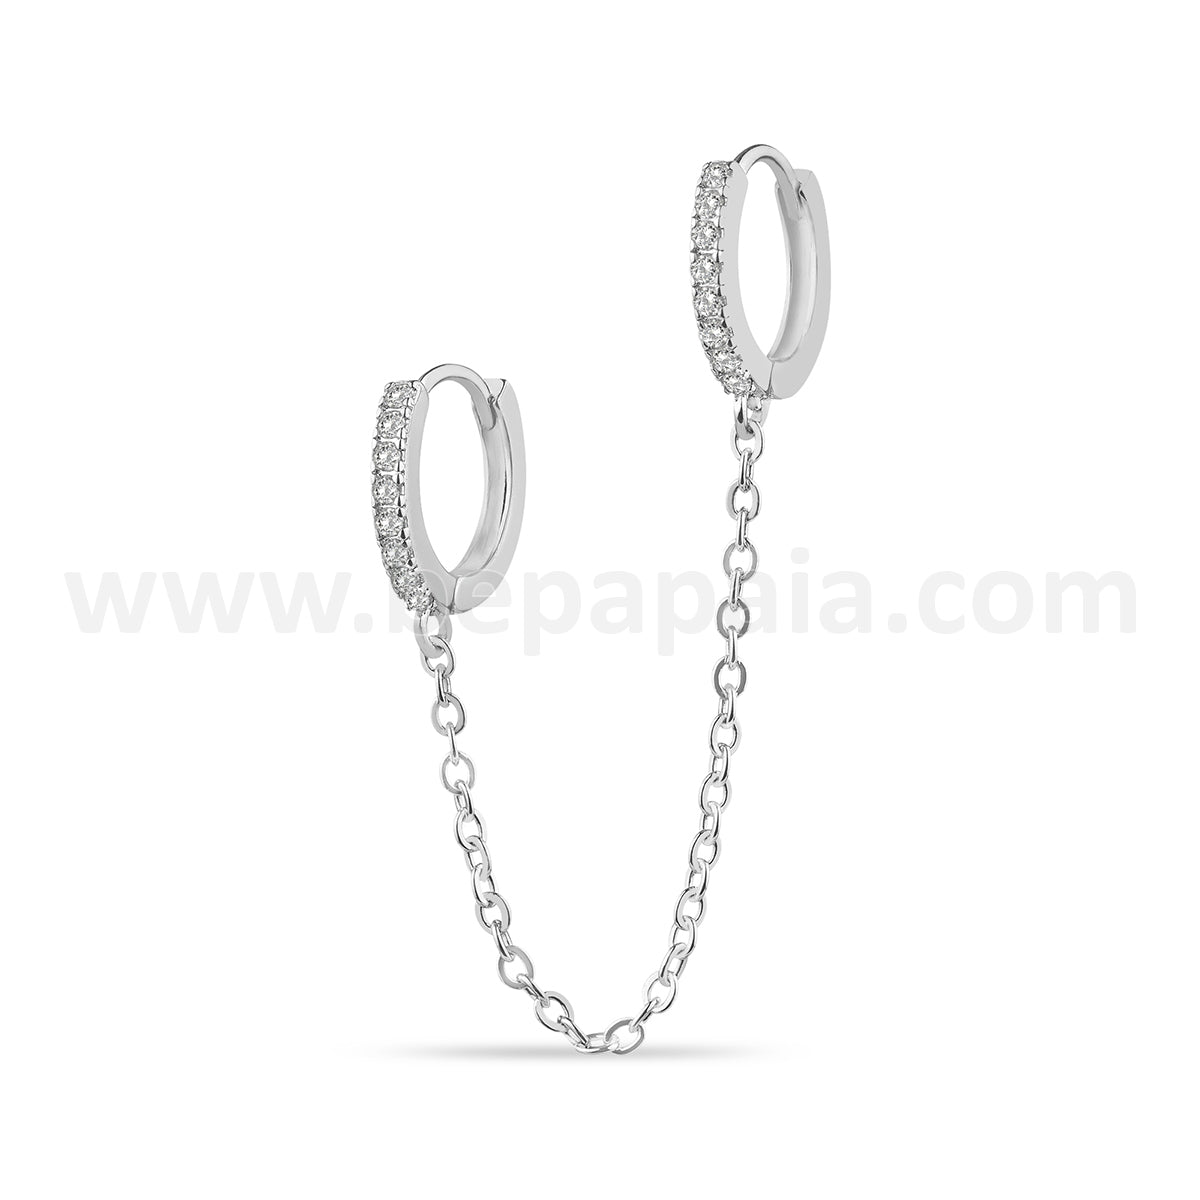 Two hoop earrings with multi-zircons and chain